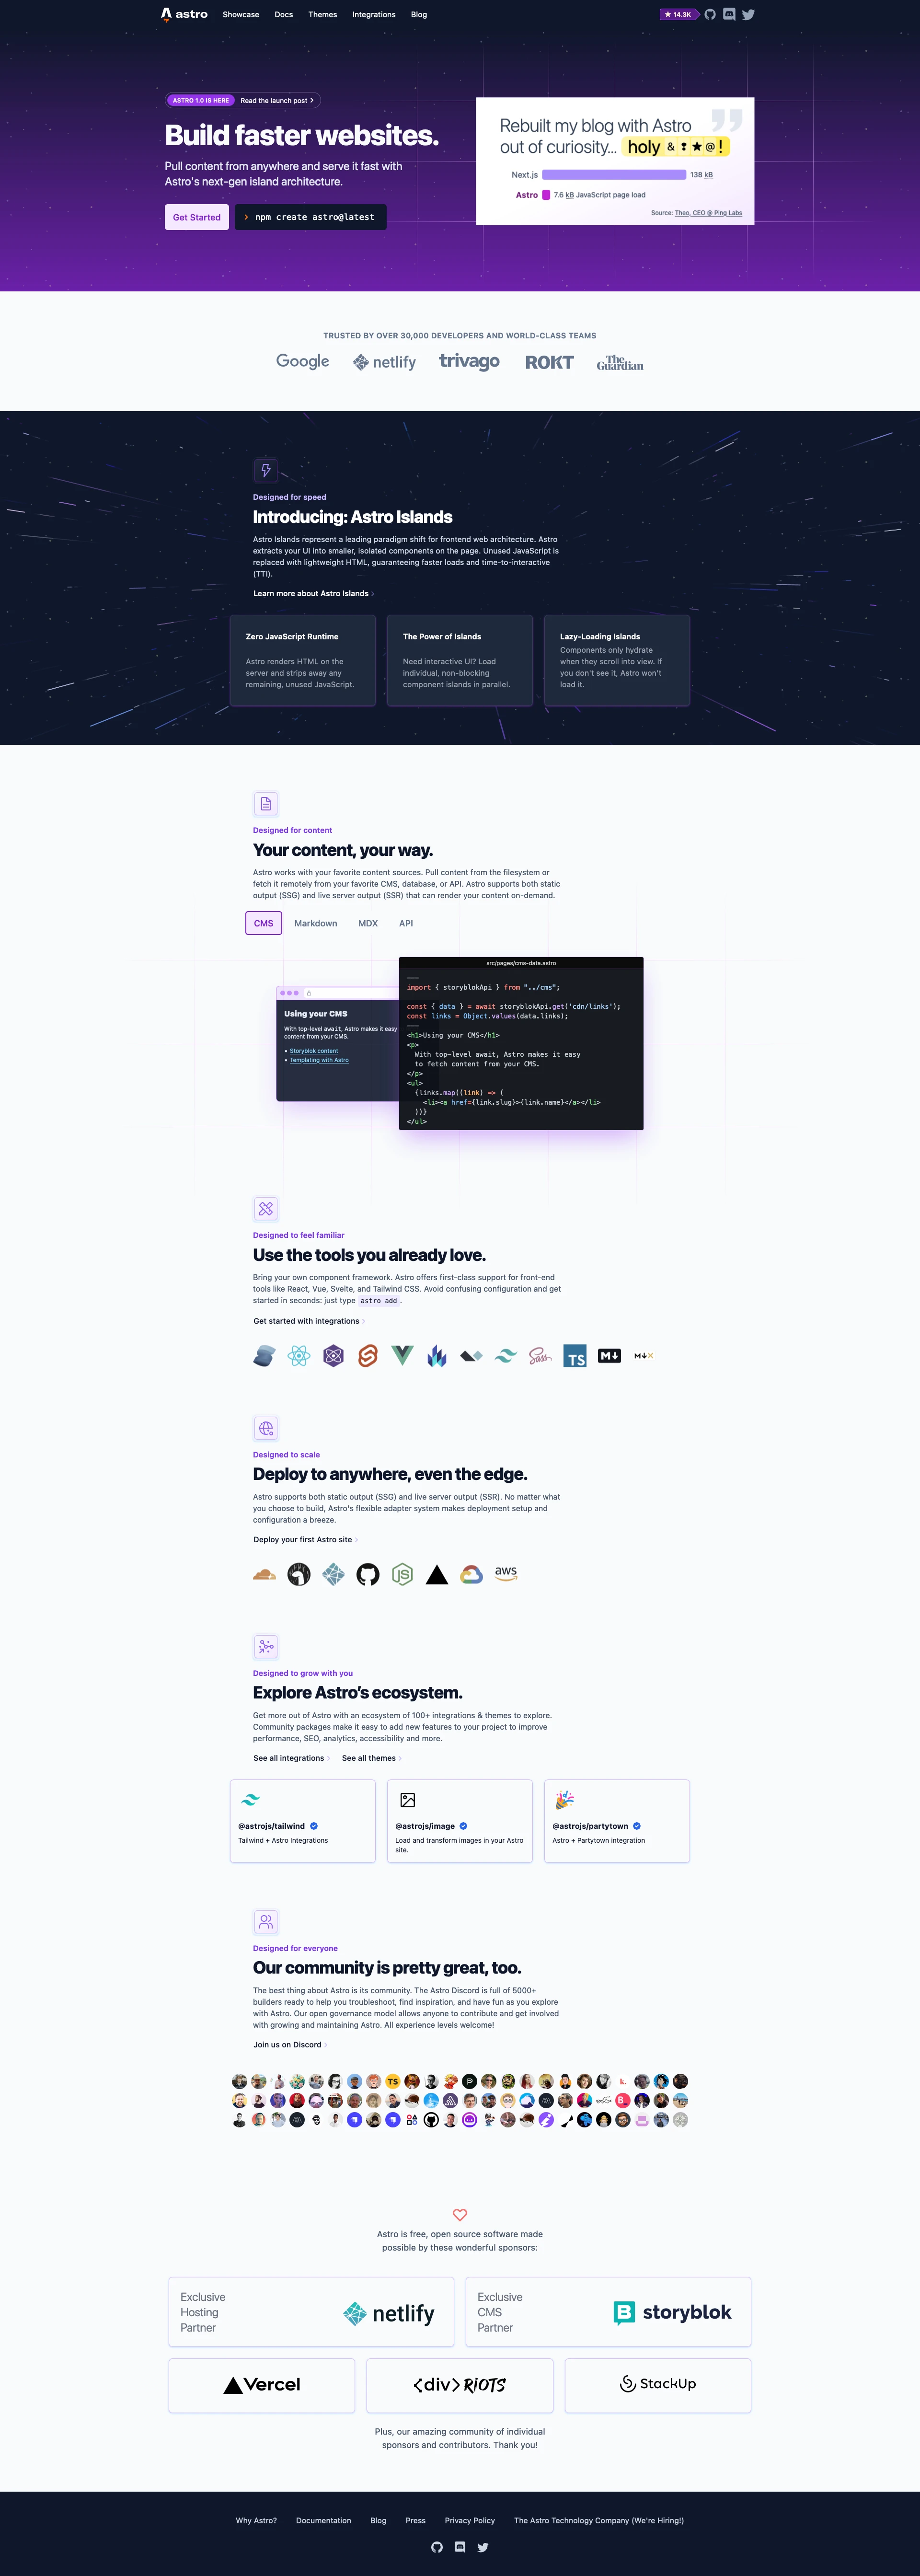 Astro Landing Page Example: Build faster websites. Pull content from anywhere and serve it fast with Astro's next-gen island architecture. Astro is the web framework that you'll enjoy using.